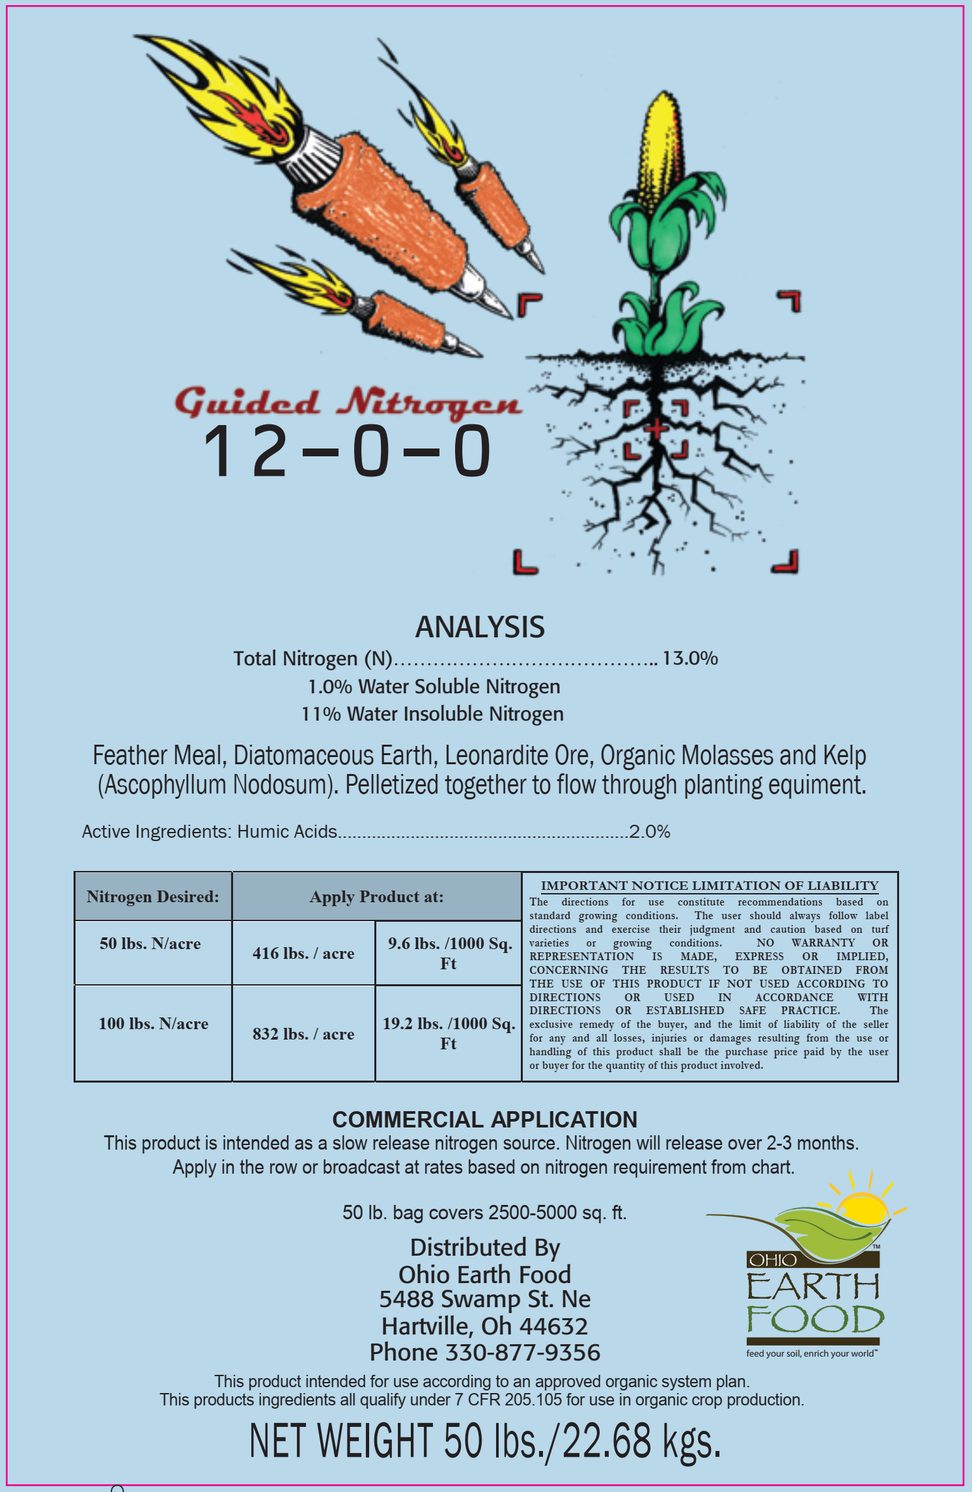 Guided Nitrogen 12-0-0 pelletized feather meal with kelp, humate and Diat. Earth